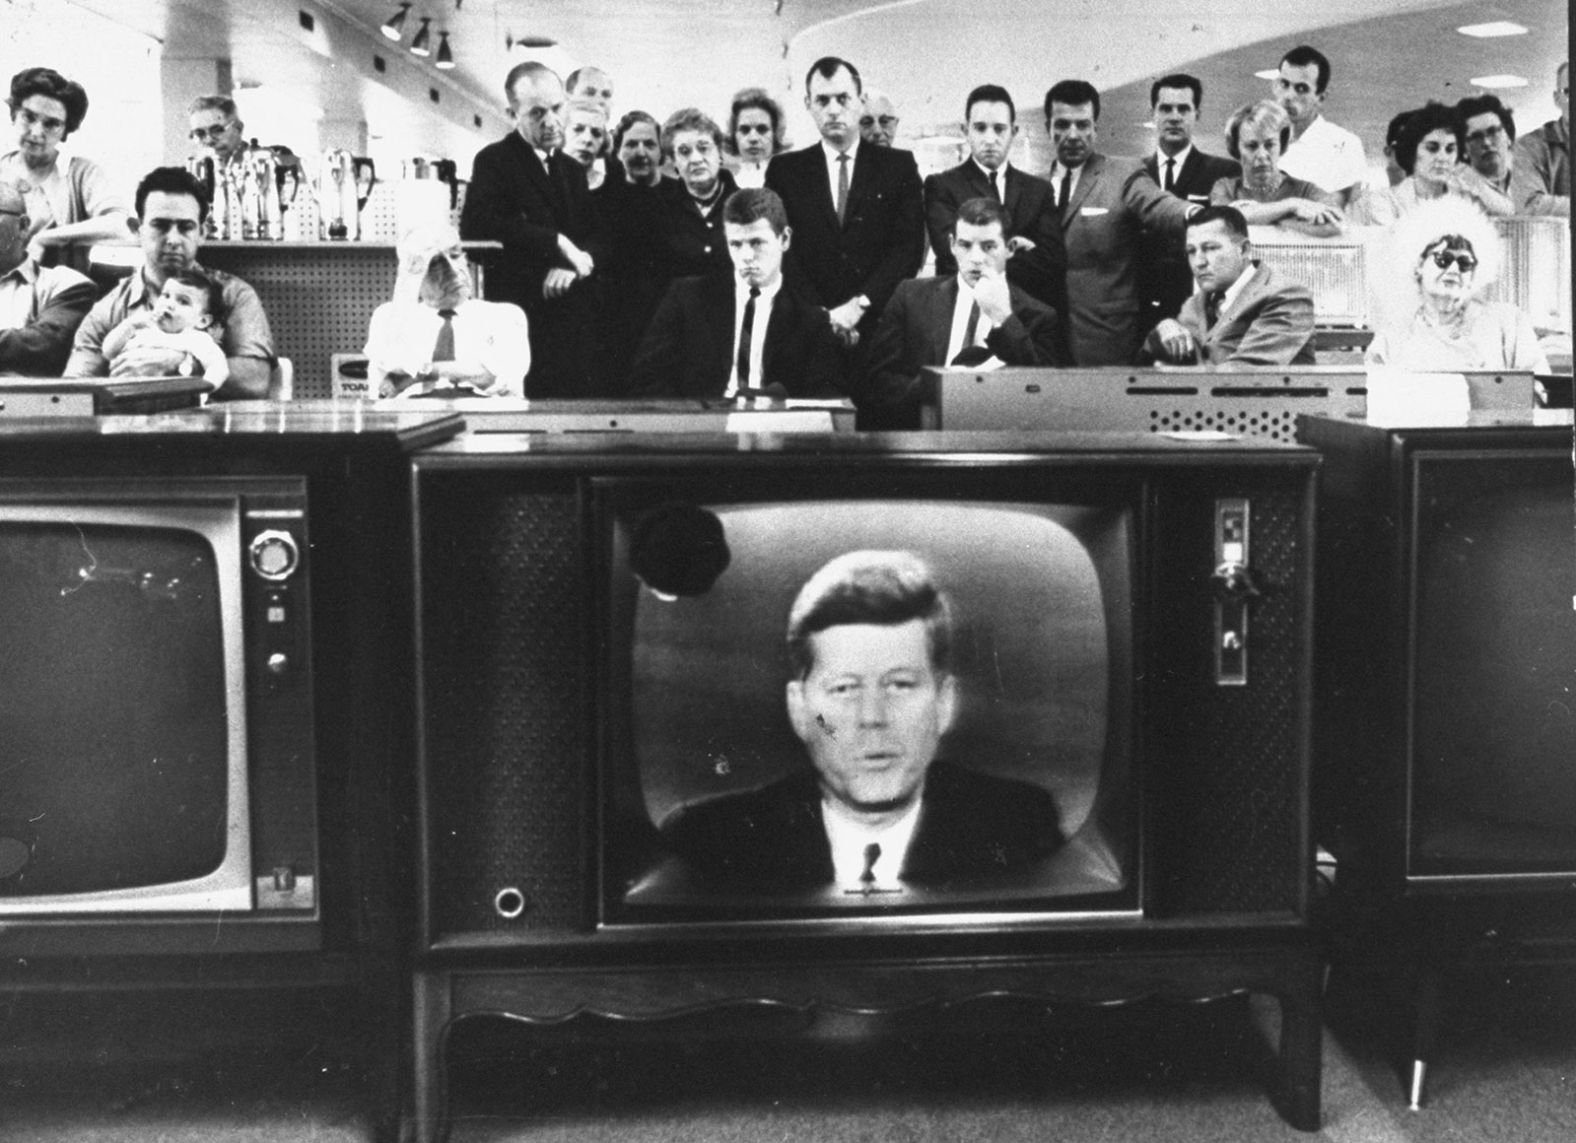 Customers in a California store's electronics department watch Kennedy deliver a televised address about the Cuban Missile Crisis in October 1962.